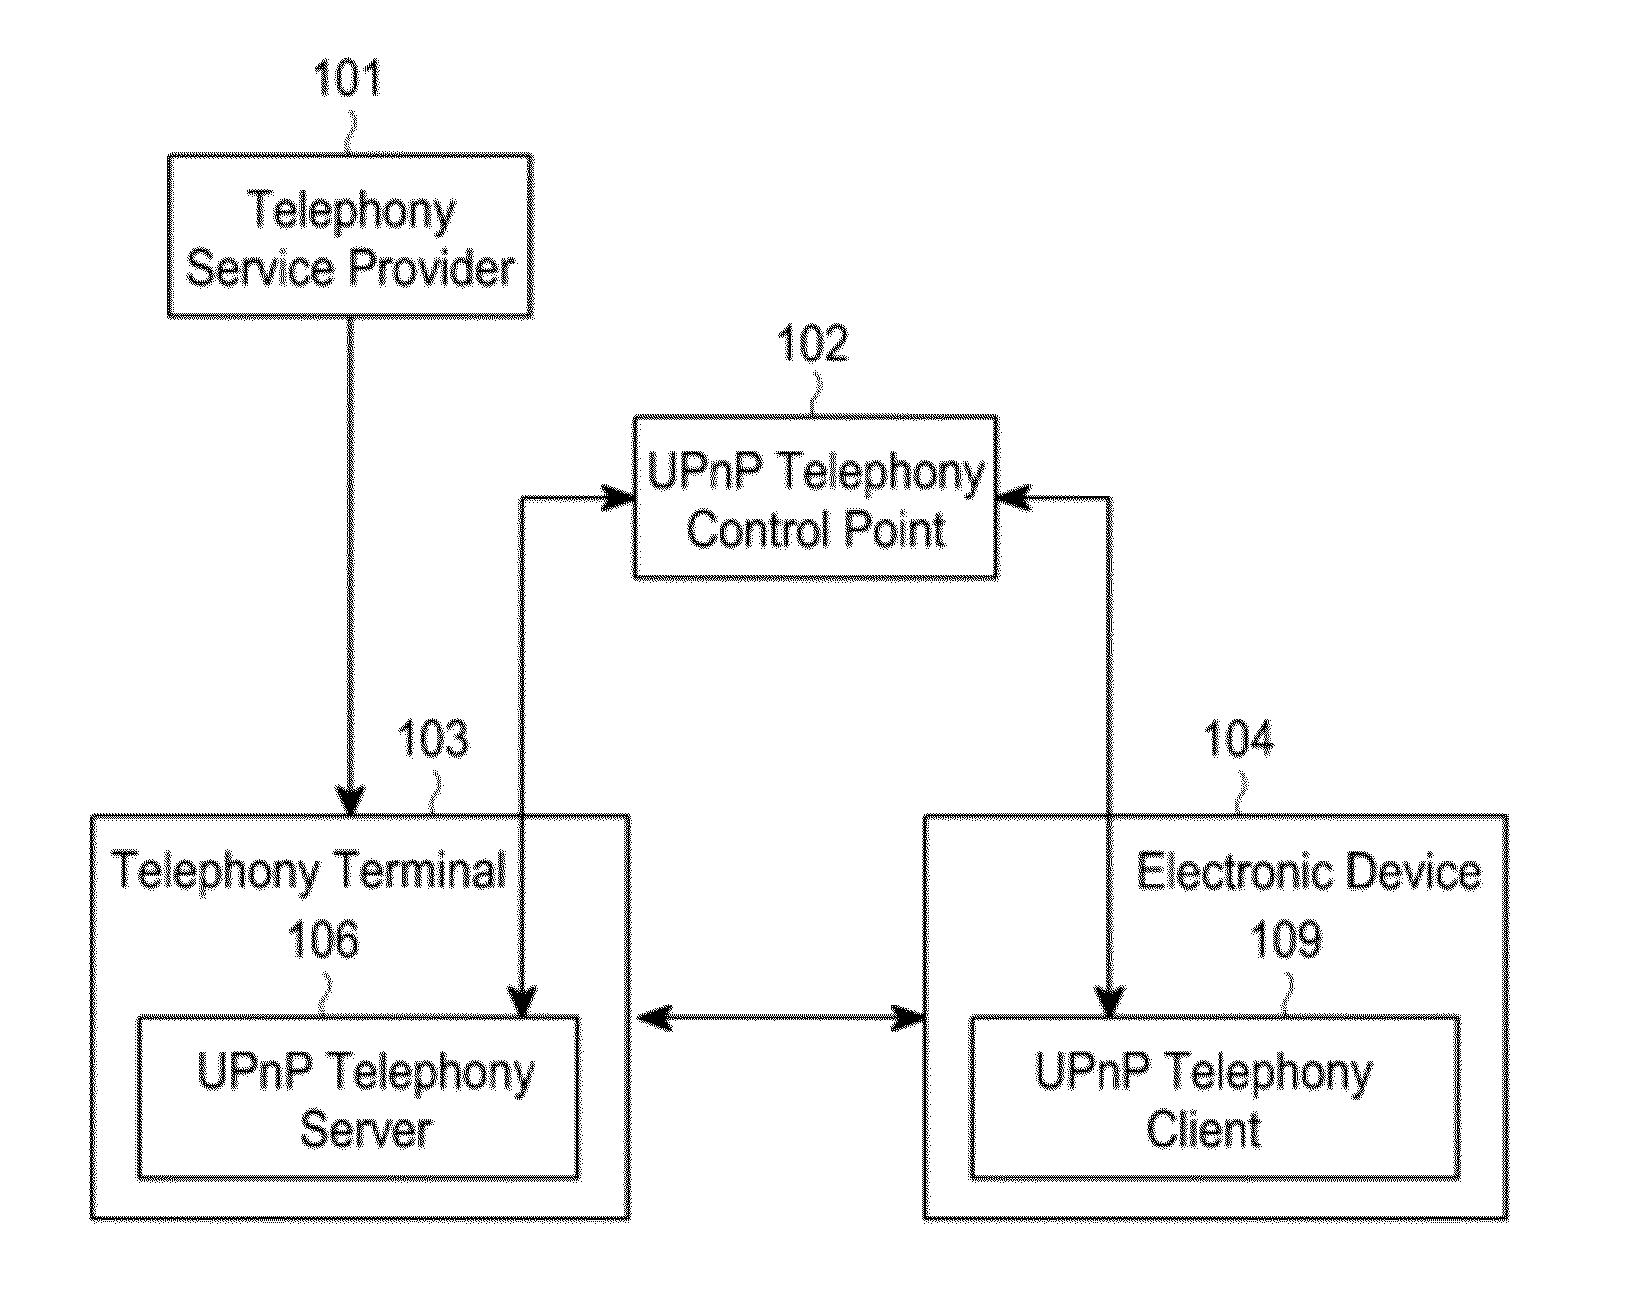 Apparatus and method for providing click-to-call service